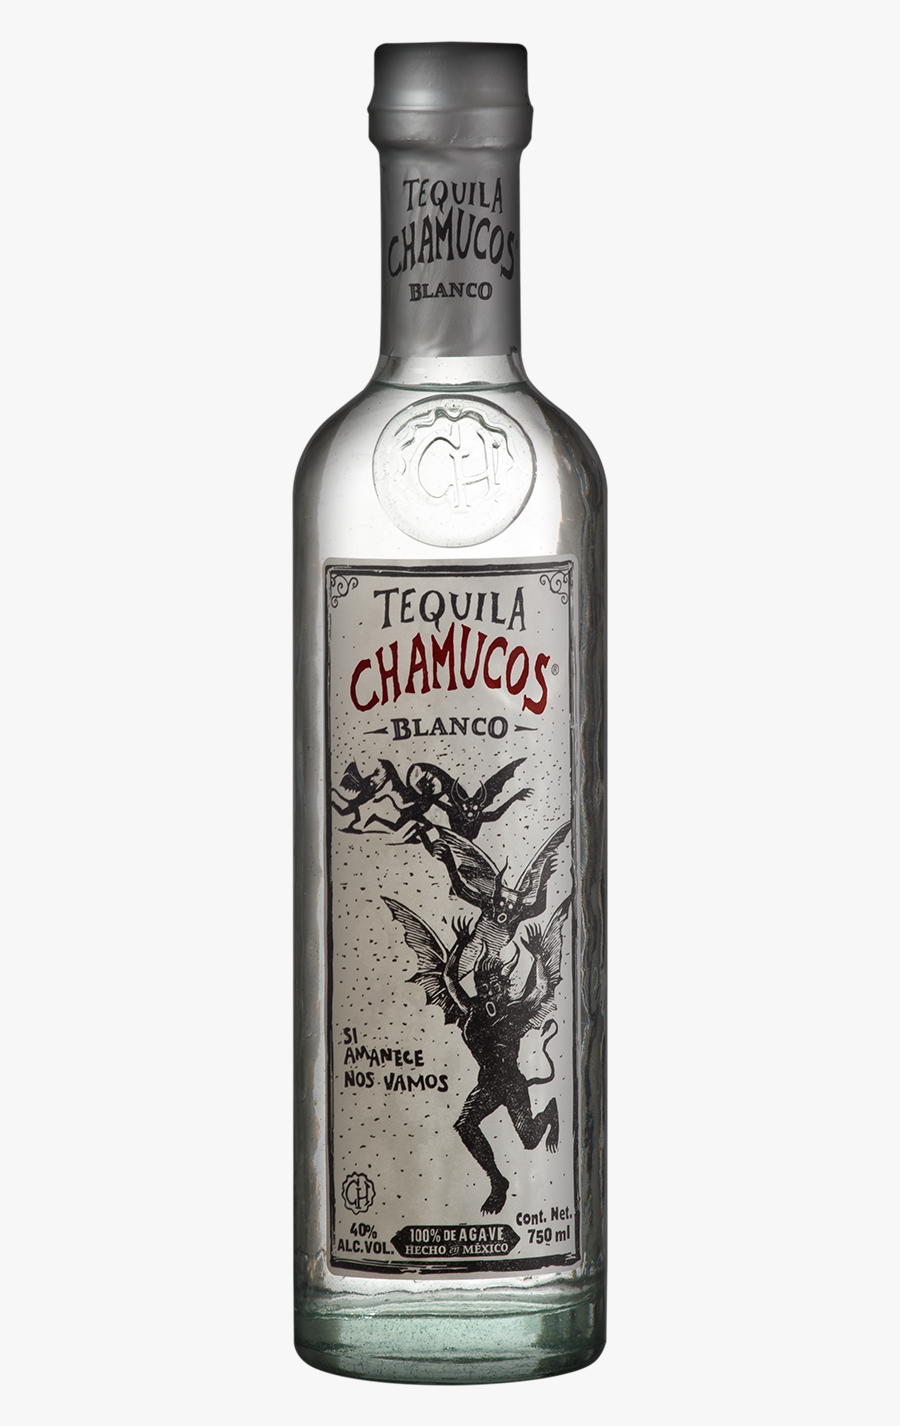 Tequila Png - Tequila Chamucos Blanco Png, Transparent Clipart